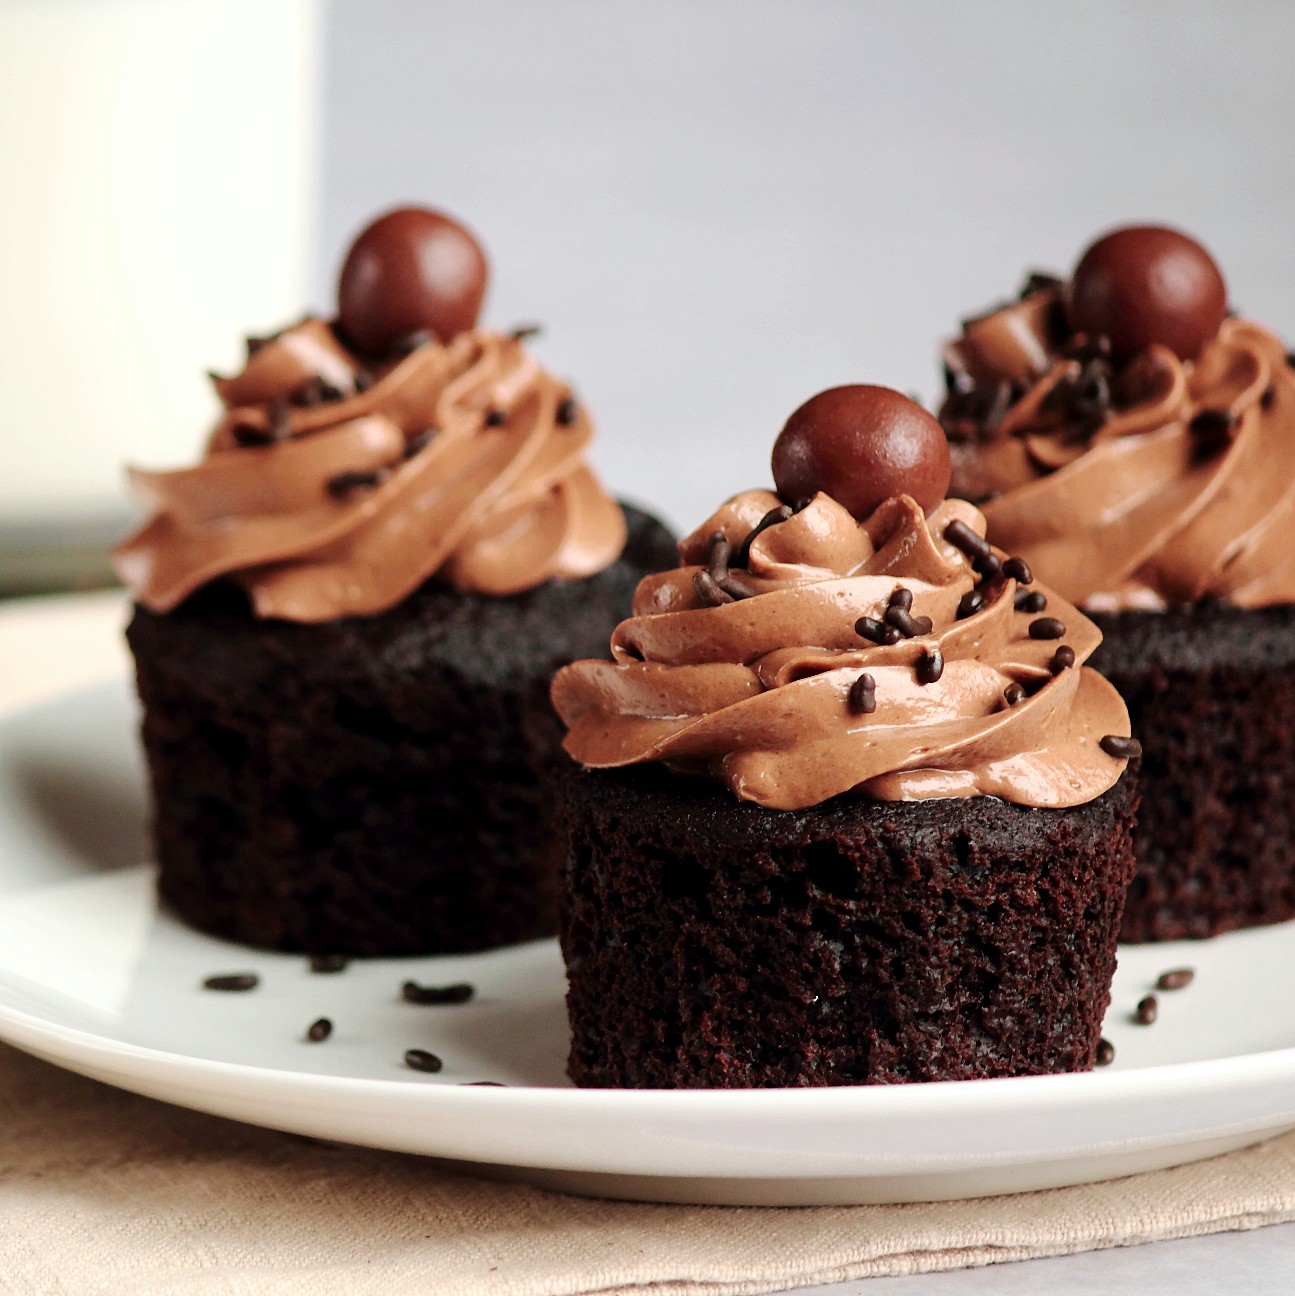 Malted Chocolate Cupcakes